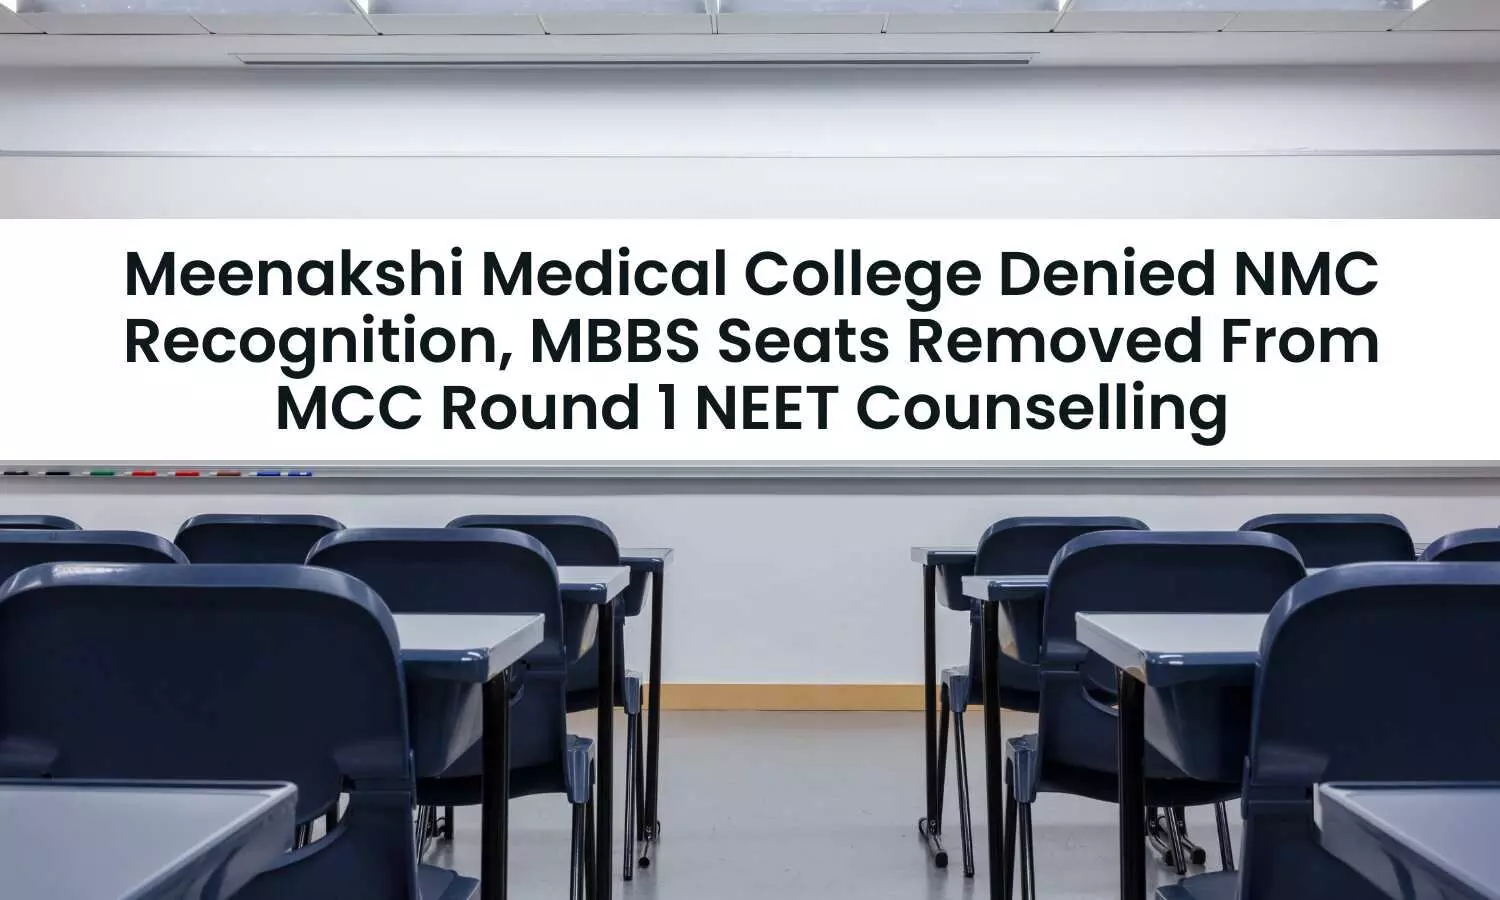 Meenakshi Medical College denied NMC recognition, MBBS seats removed from MCC round 1 NEET Counselling